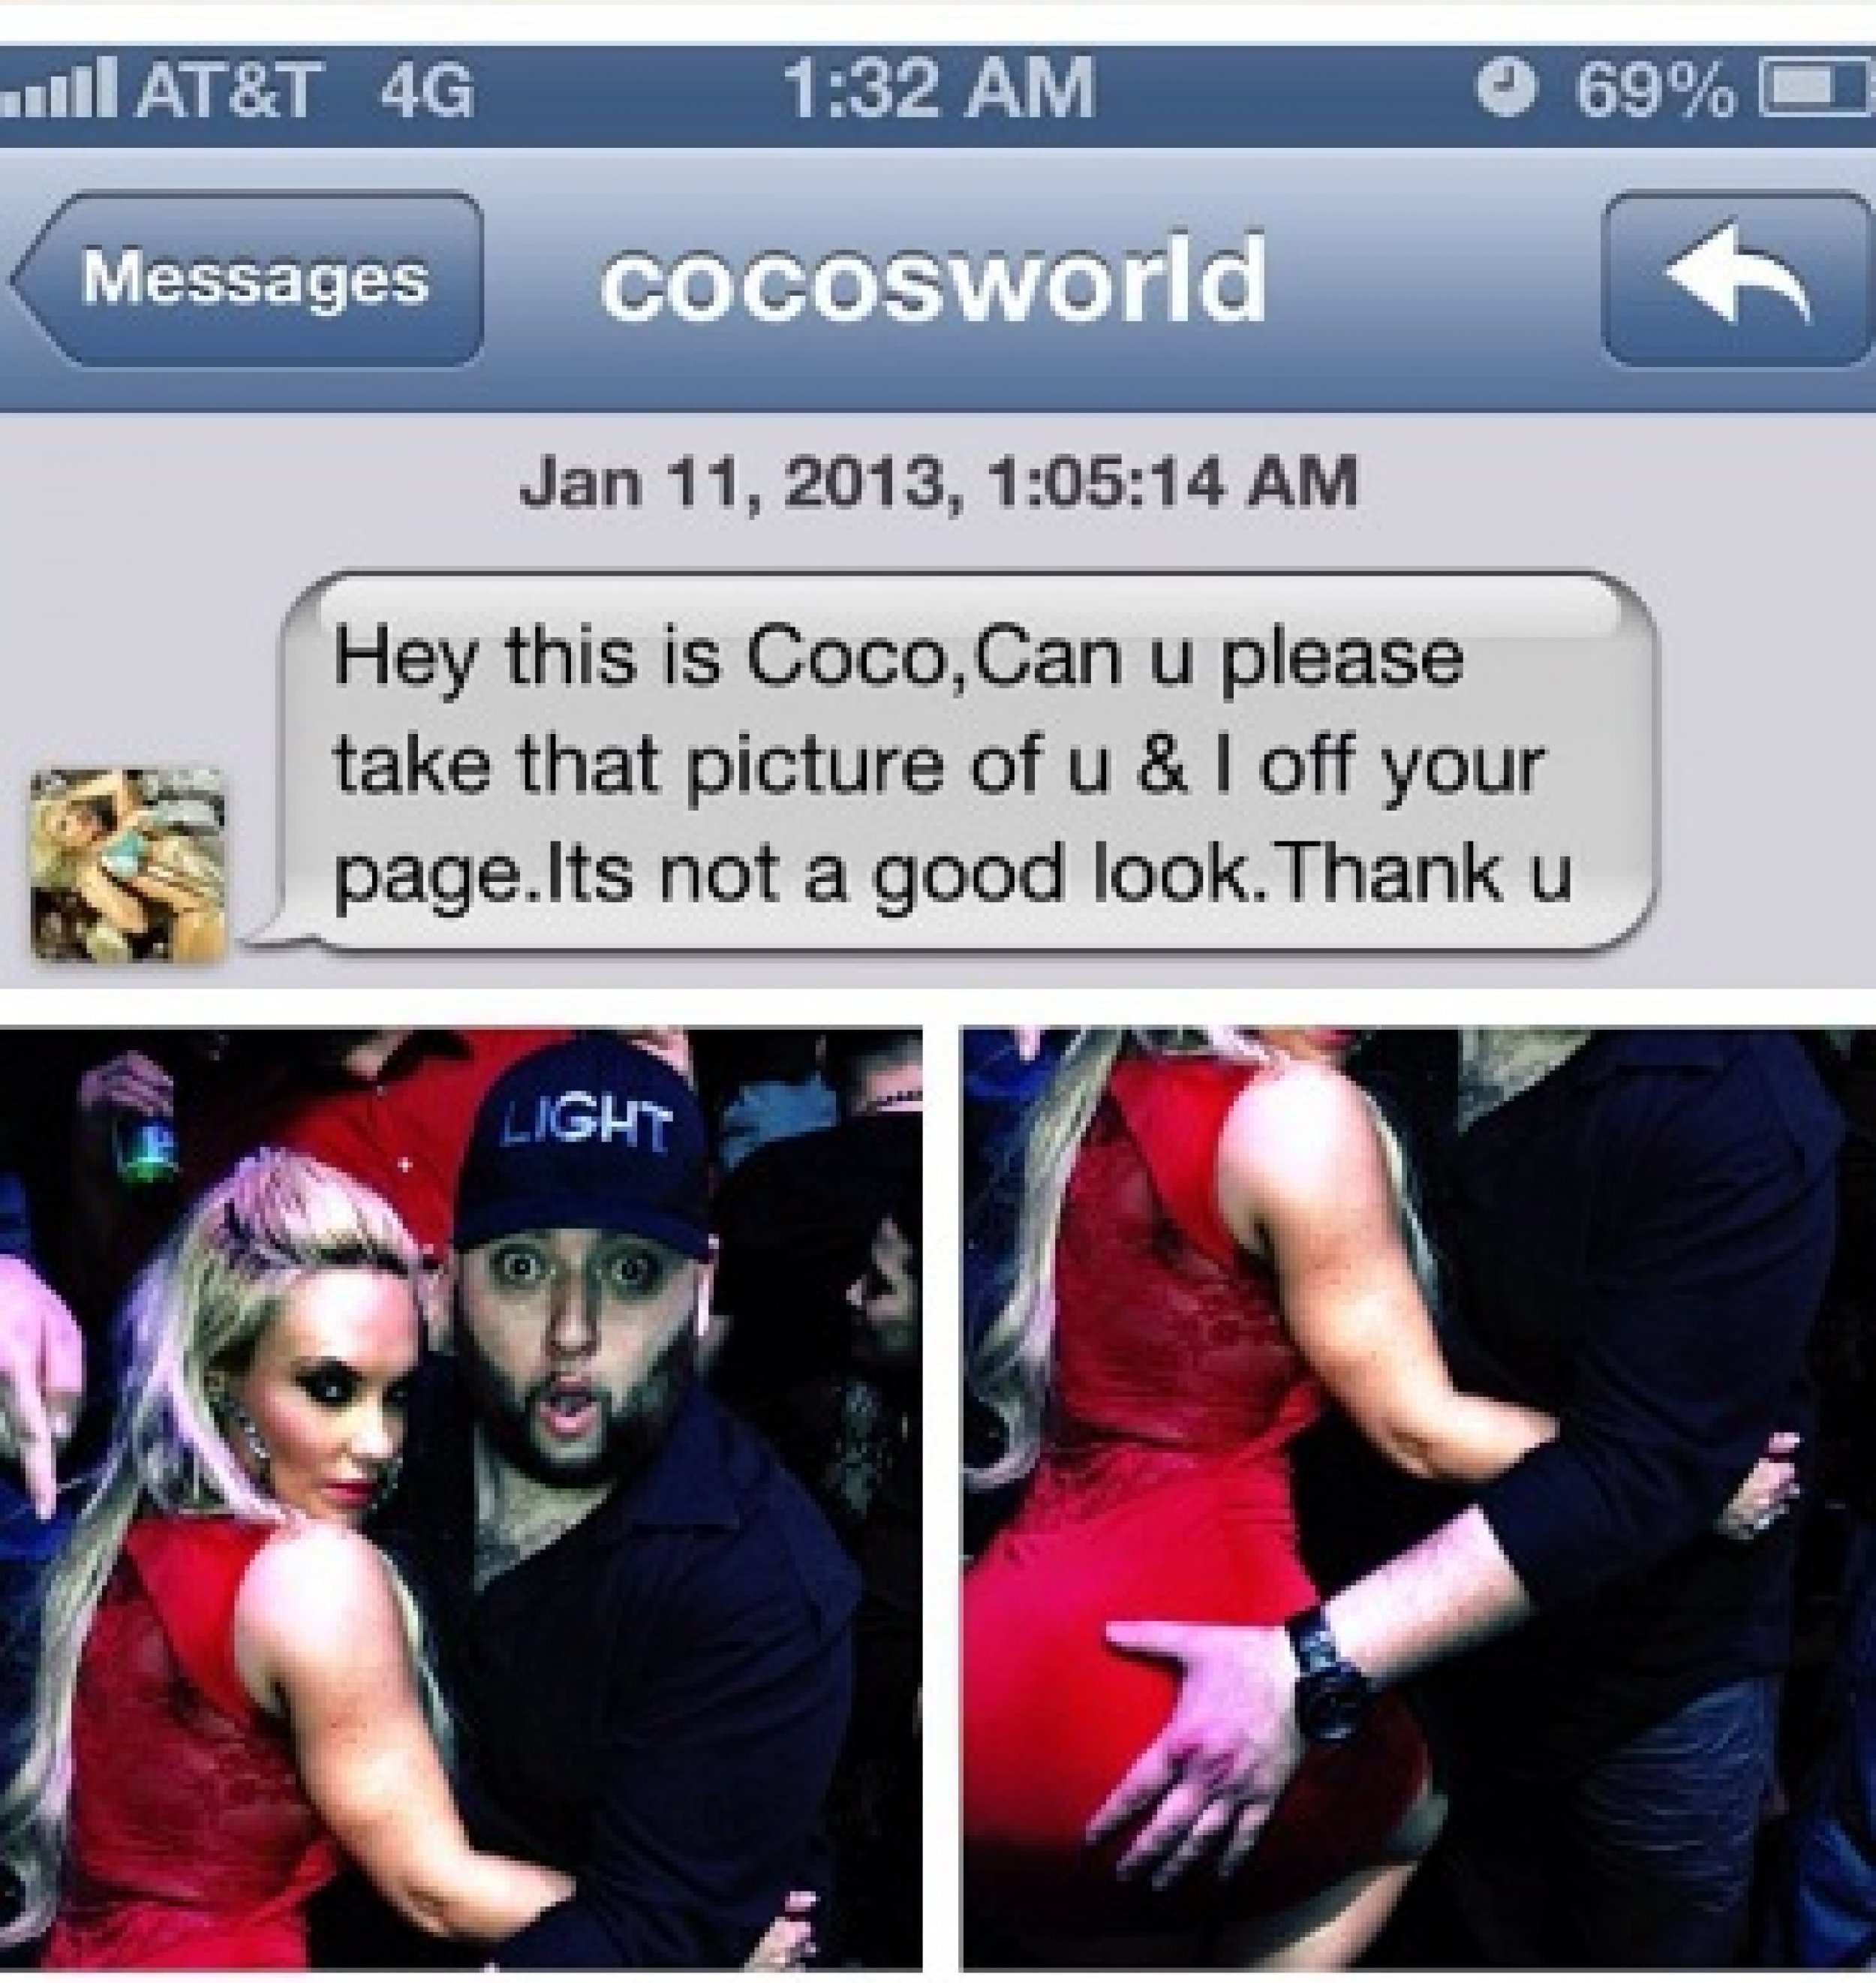 Ice-T Disrespected Again? Coco Gets Cozy With New Man In Second Photo Scandal